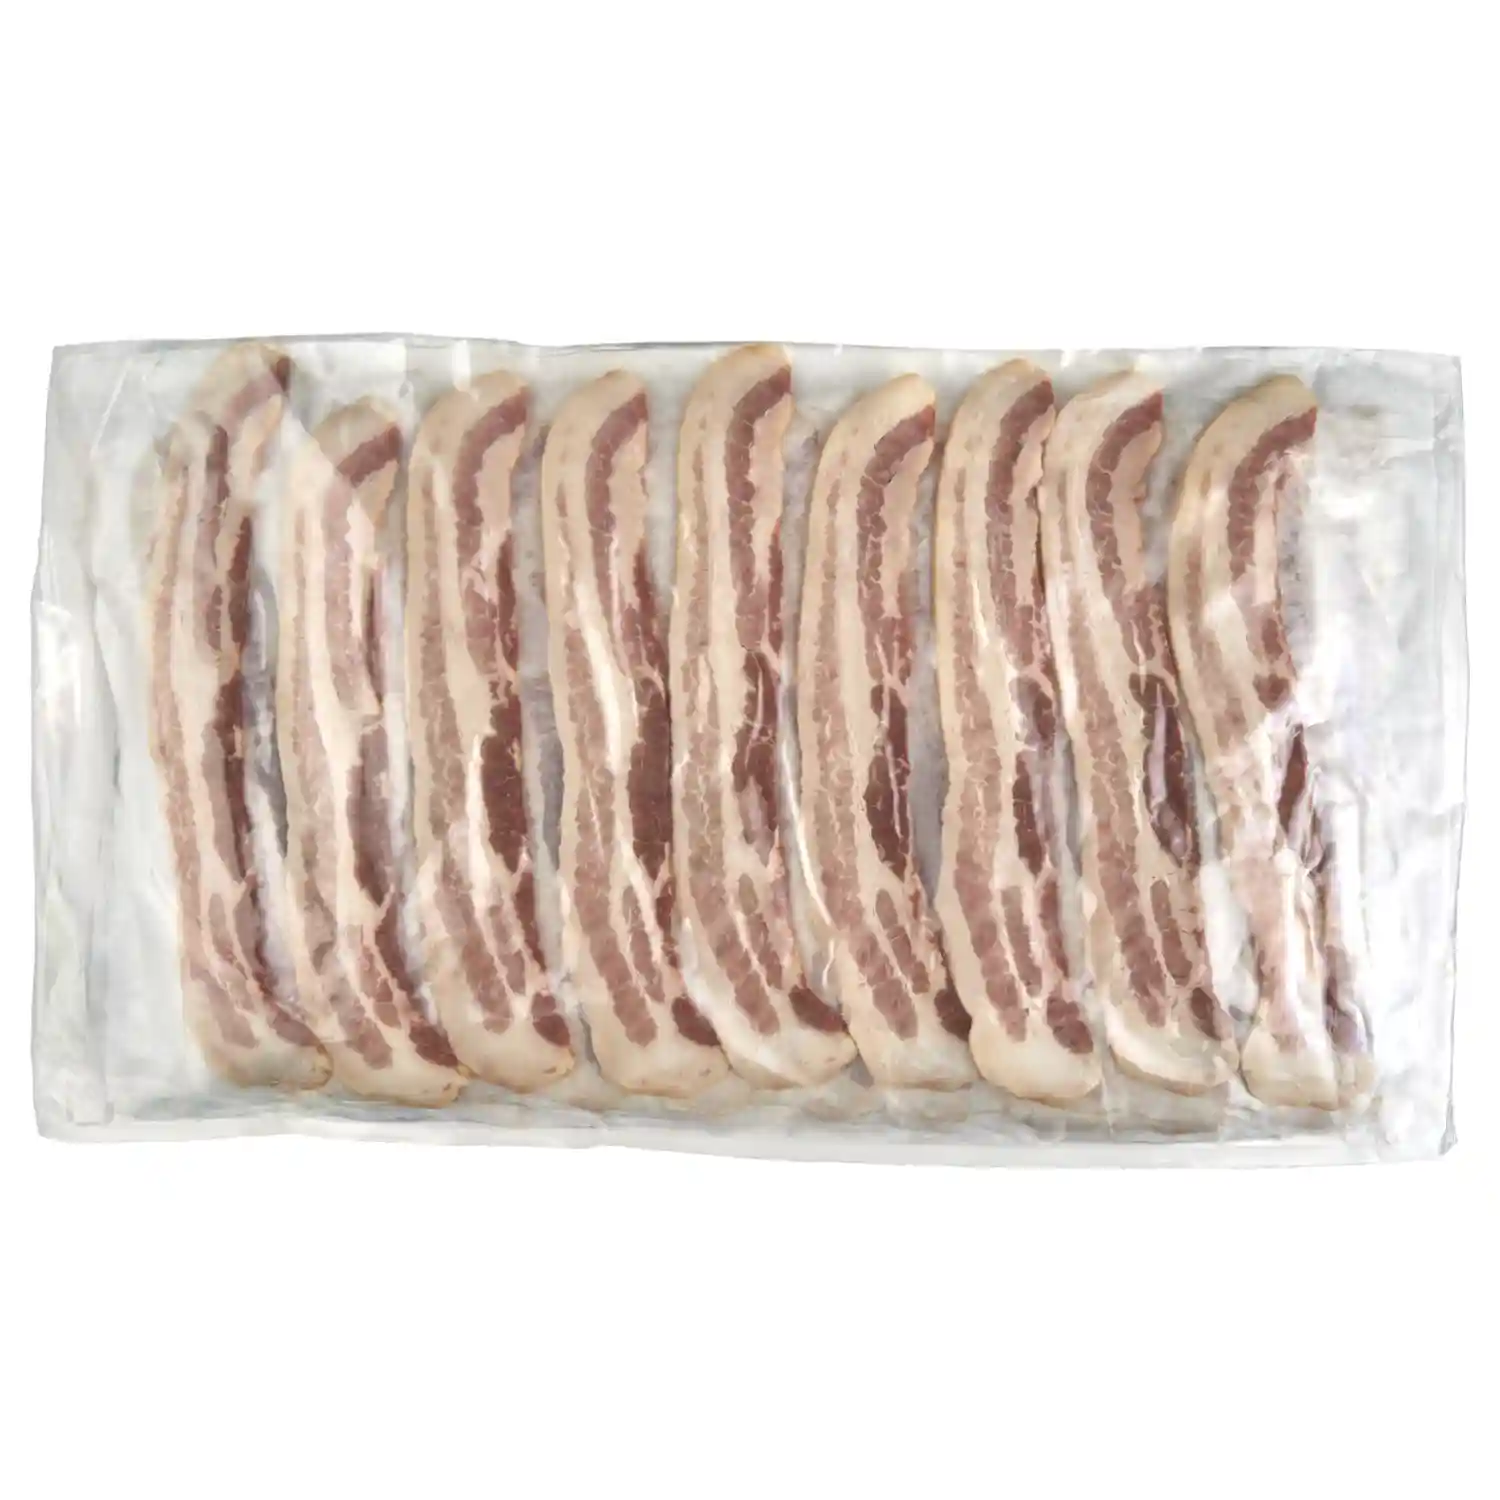 Wright® Brand Naturally Hickory Smoked Regular Sliced Bacon, Flat-Pack®, 15 Lbs, 14-18 Slices per Pound, Gas Flushed_image_21